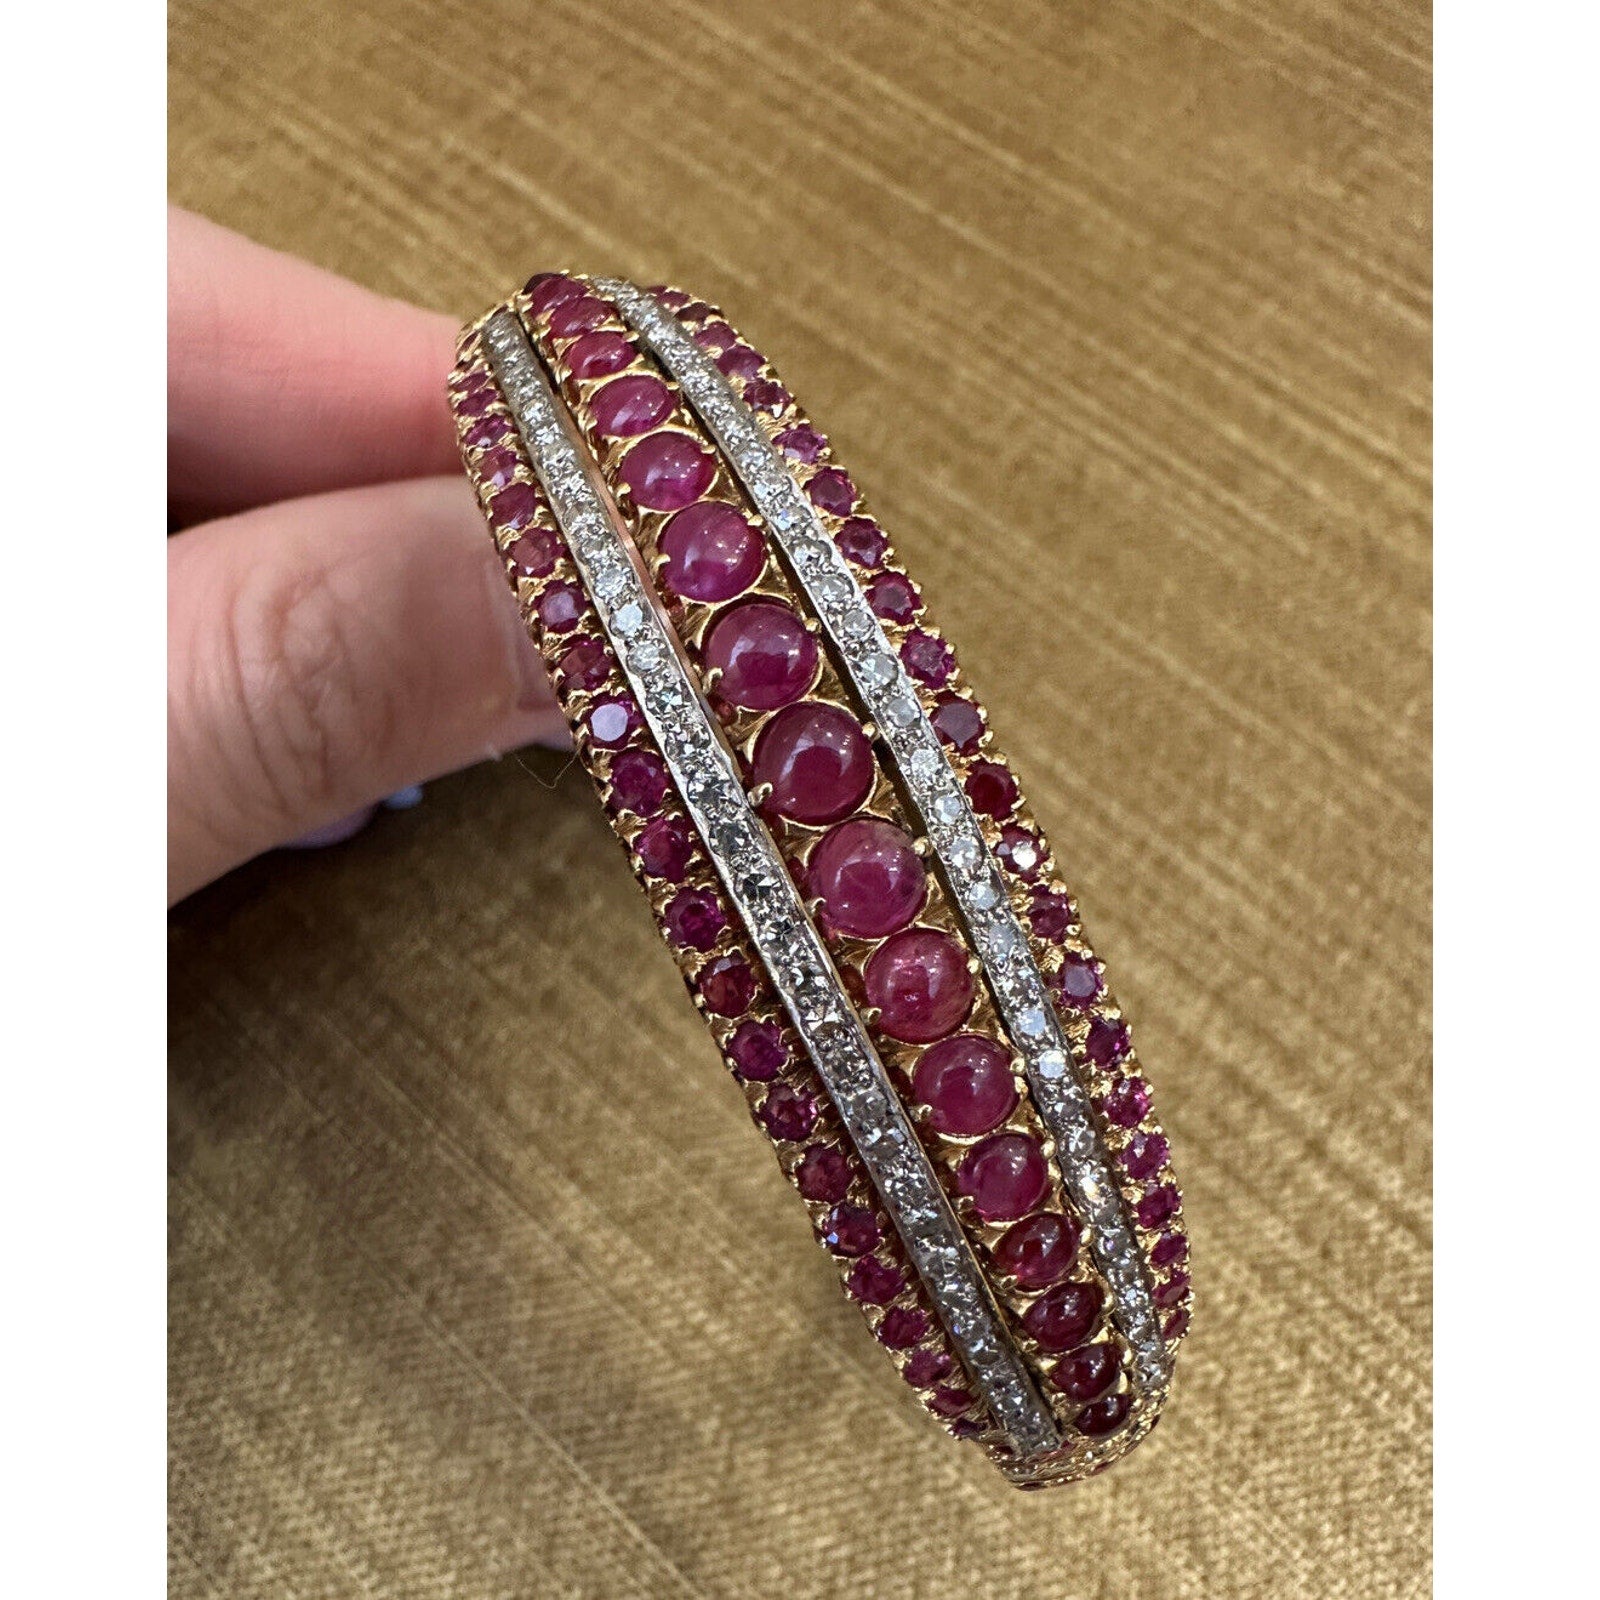 Vintage Ruby and Diamond Bangle Bracelet in 18k and 14k Yellow Gold - HM1748SE